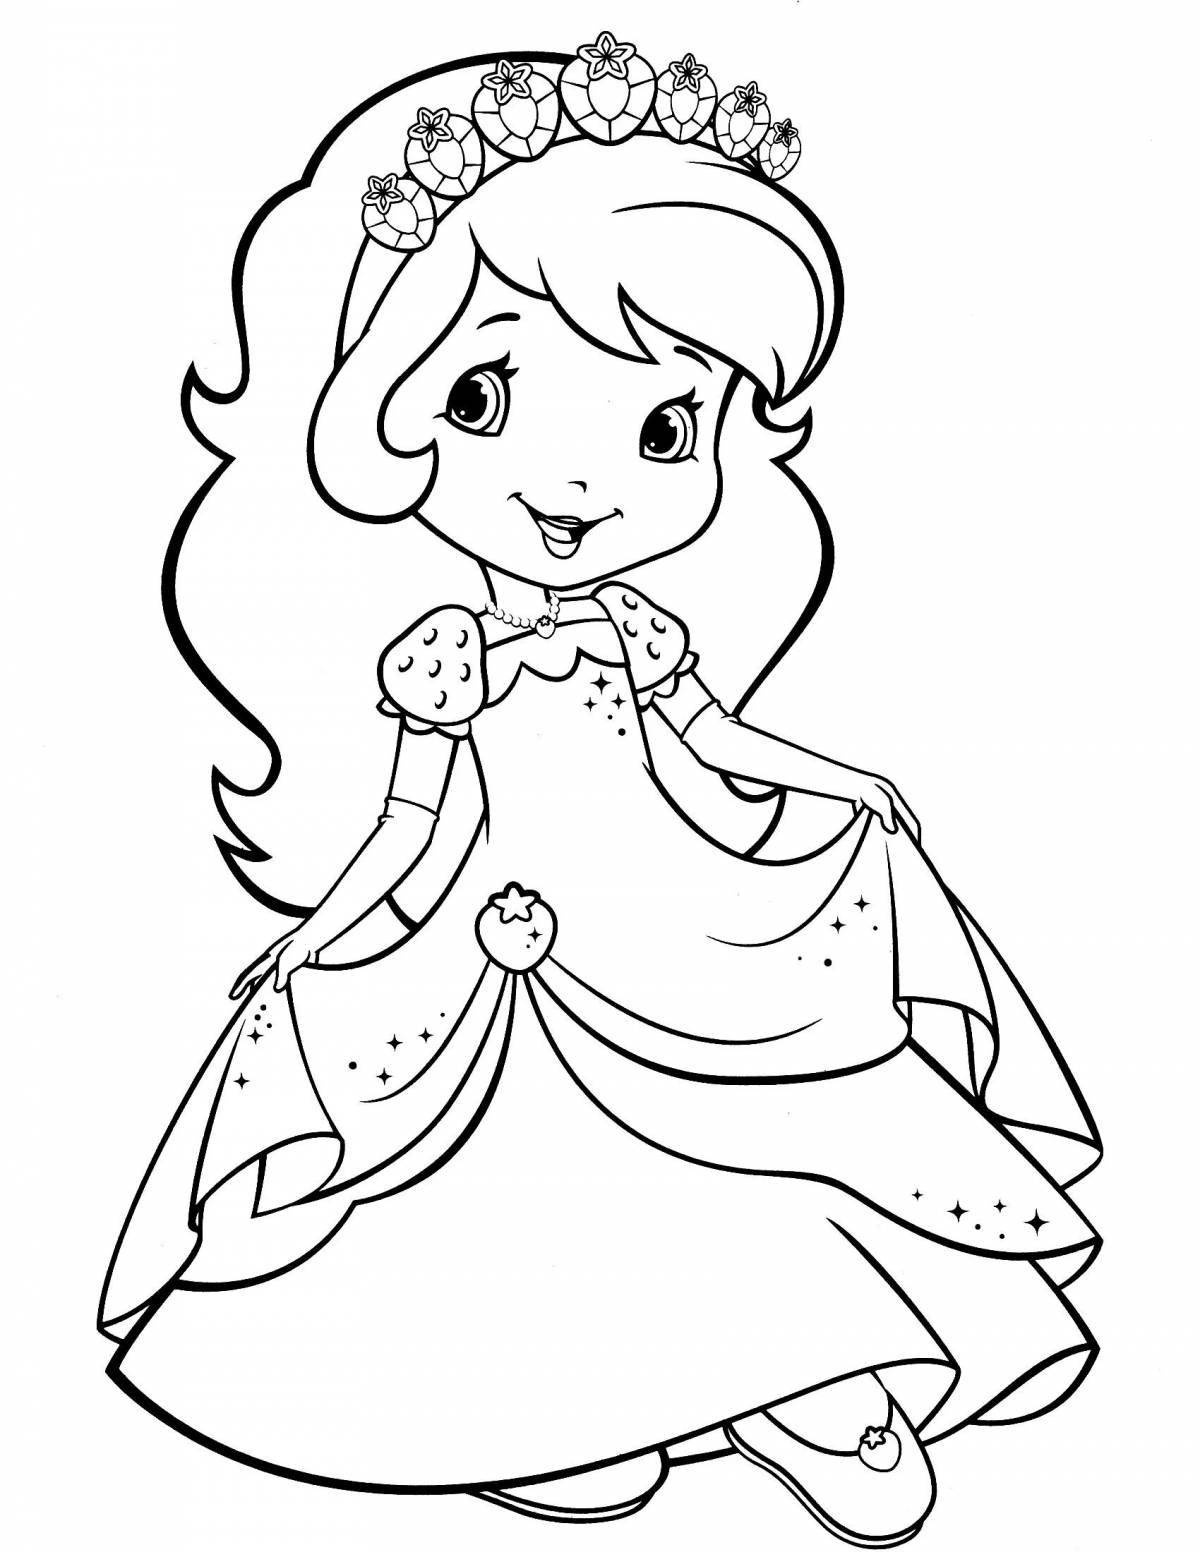 Sparkling coloring book for 3-4 year olds for girls princess